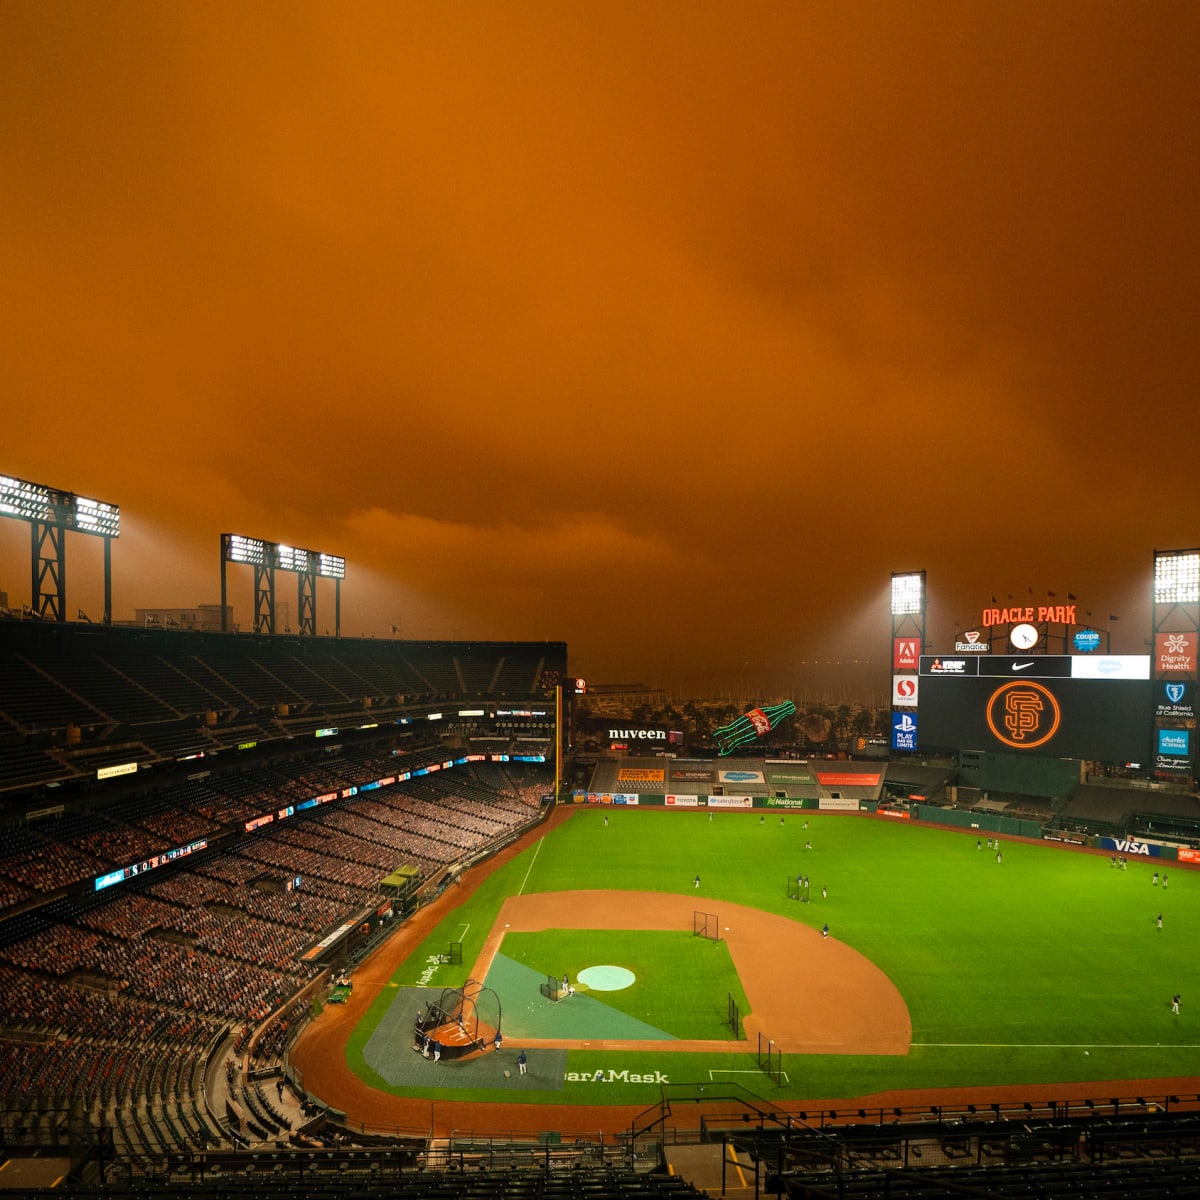 Eerie scene for Giants game as wildfire smoke engulfs Oracle Park